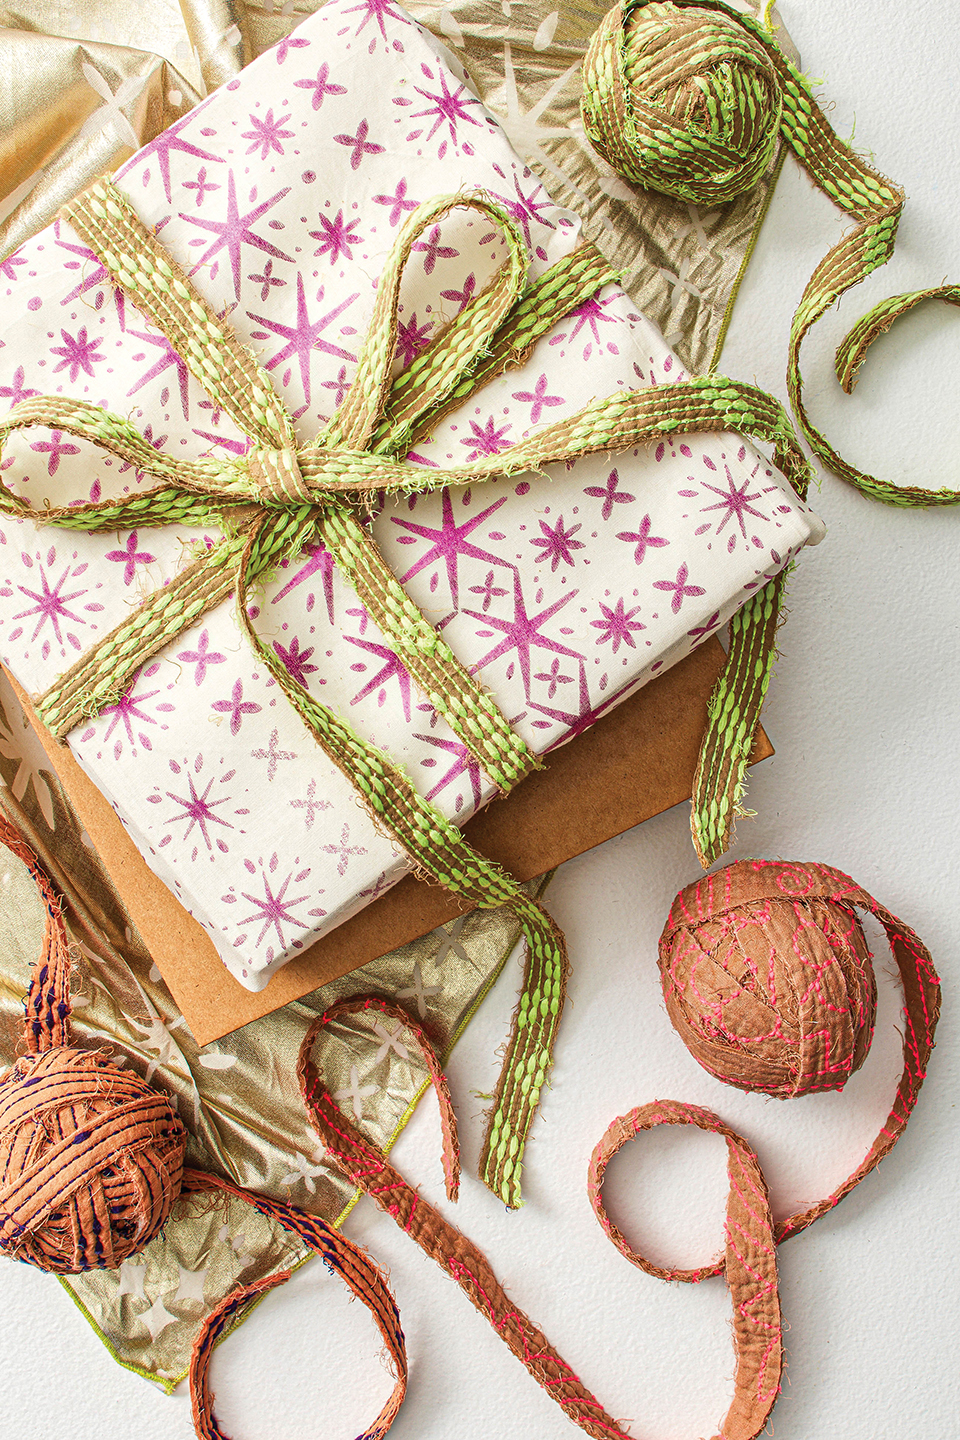 Gift wrap with pink stars and a ribbon wrapped around it